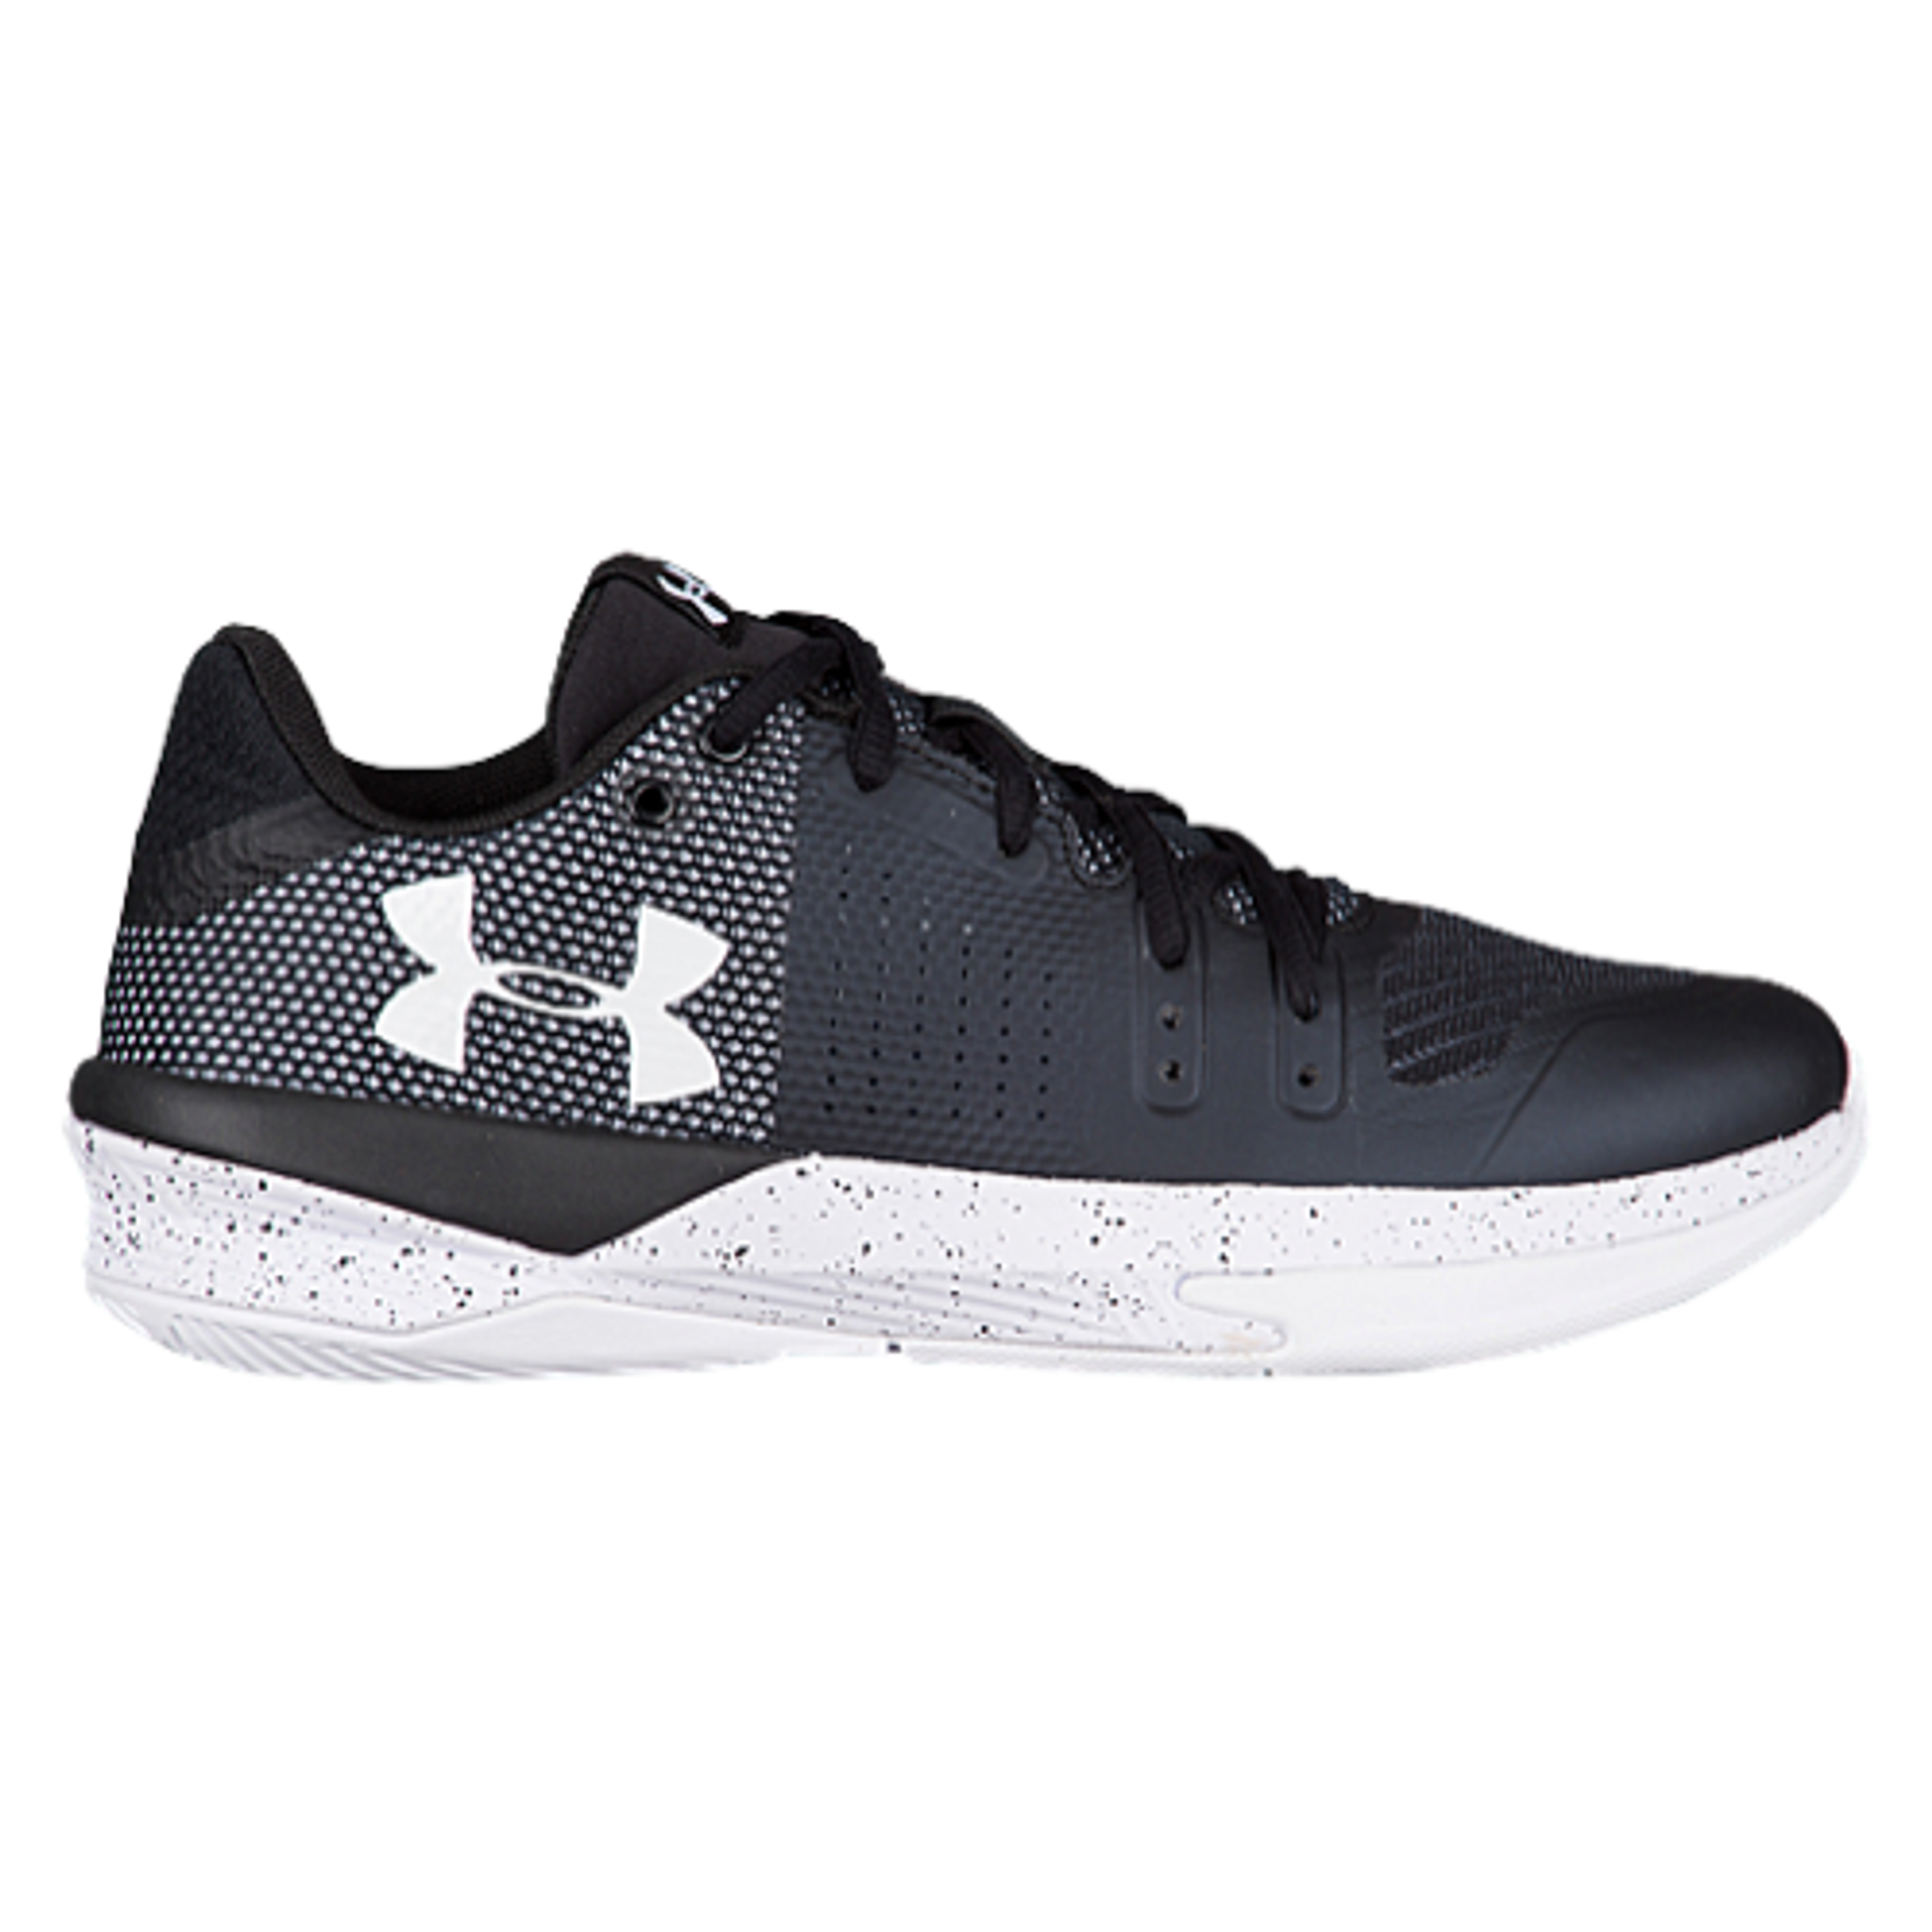 Under Armour Block City Volleyball Shoe 